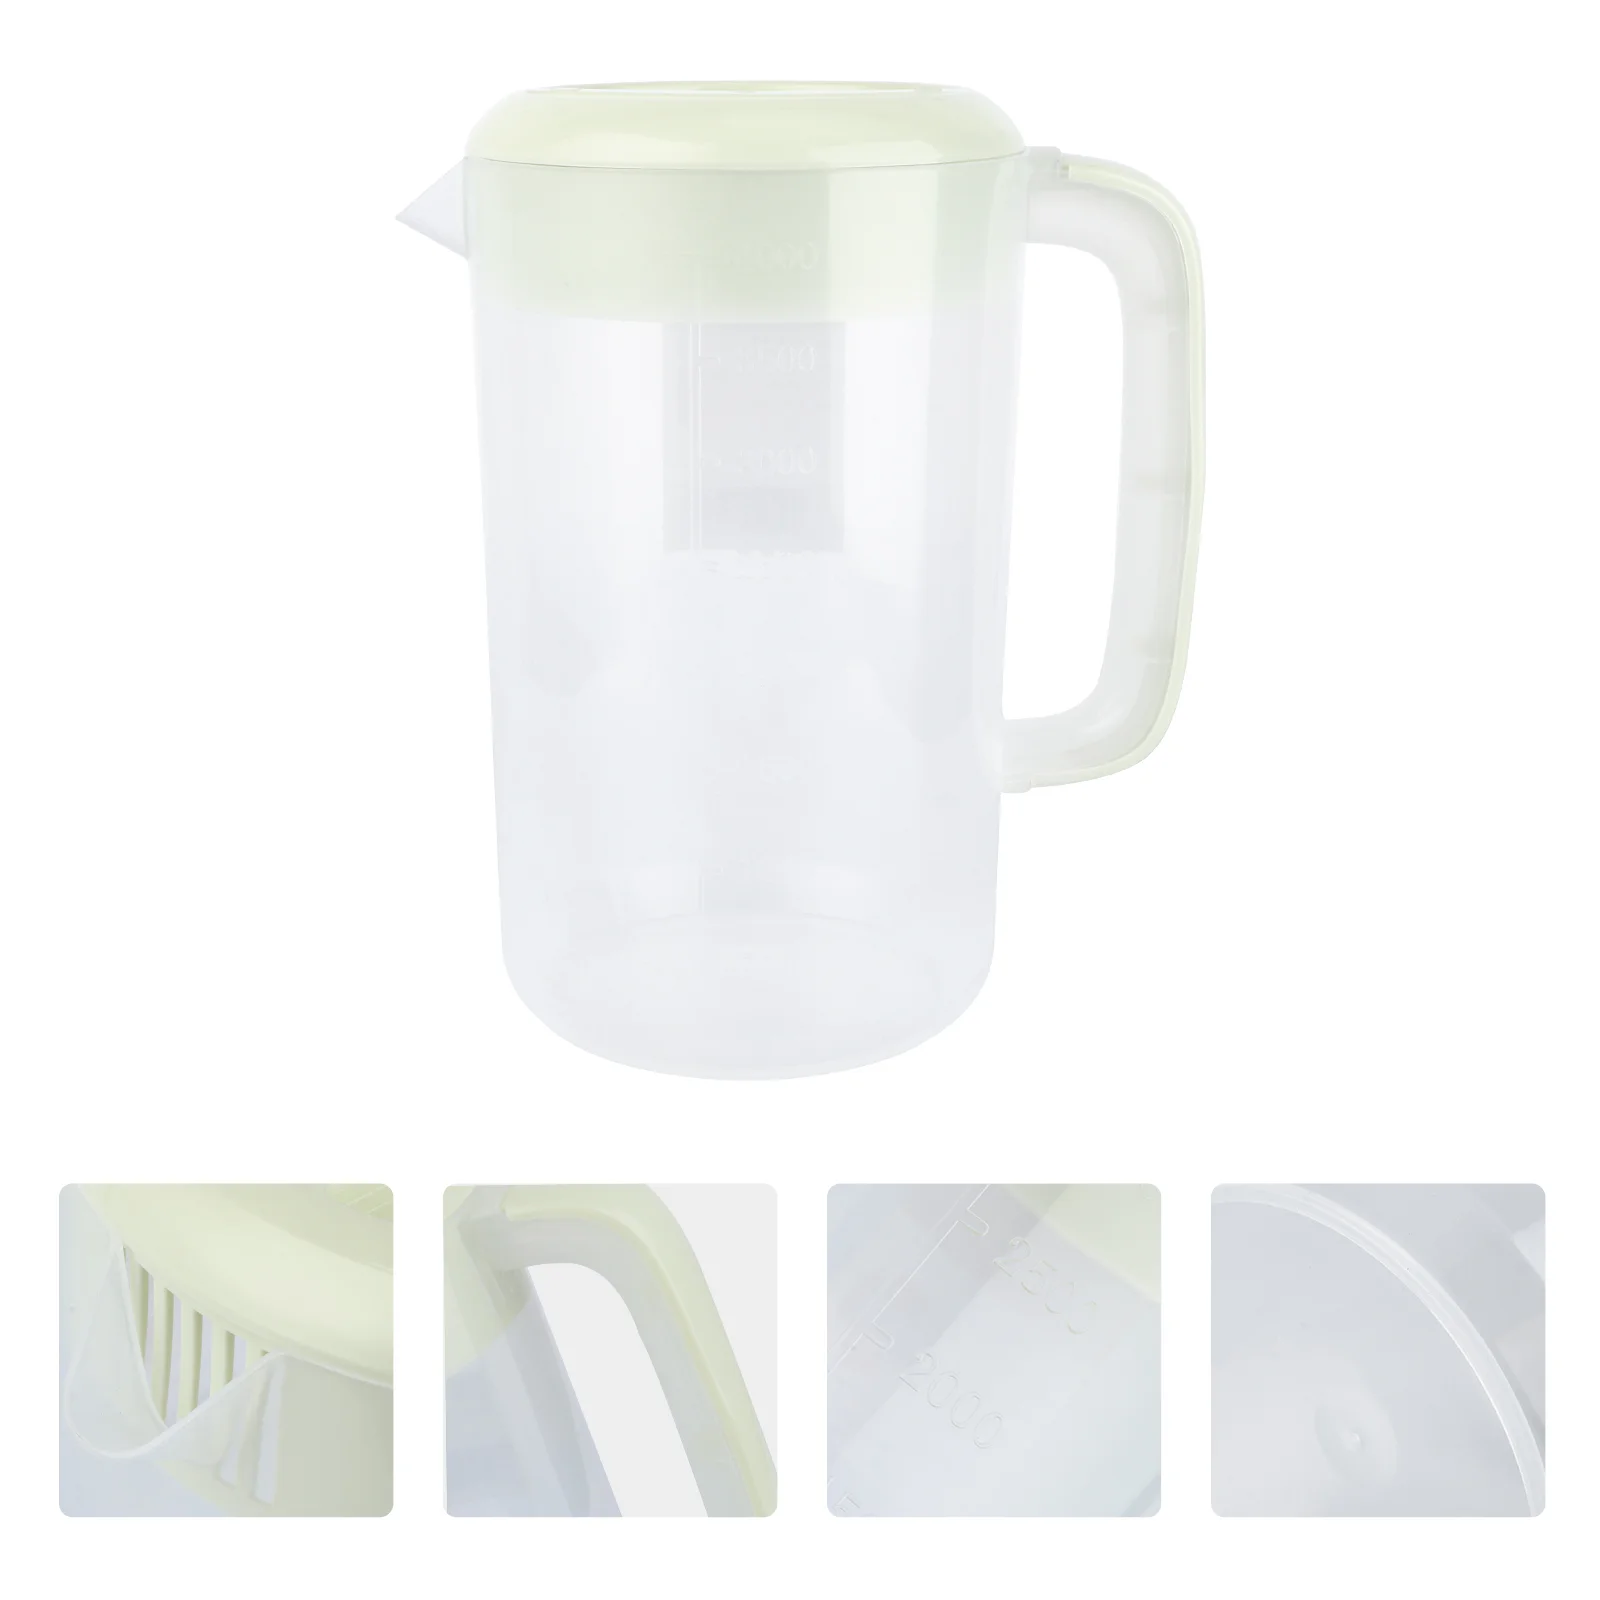 

Pitcher Water Jug Lid Beverage Kettle Tea Cold Pitchers Clear Drink Container Lemonade Mixing Bottle Drinks Iced Easy Pot Handle